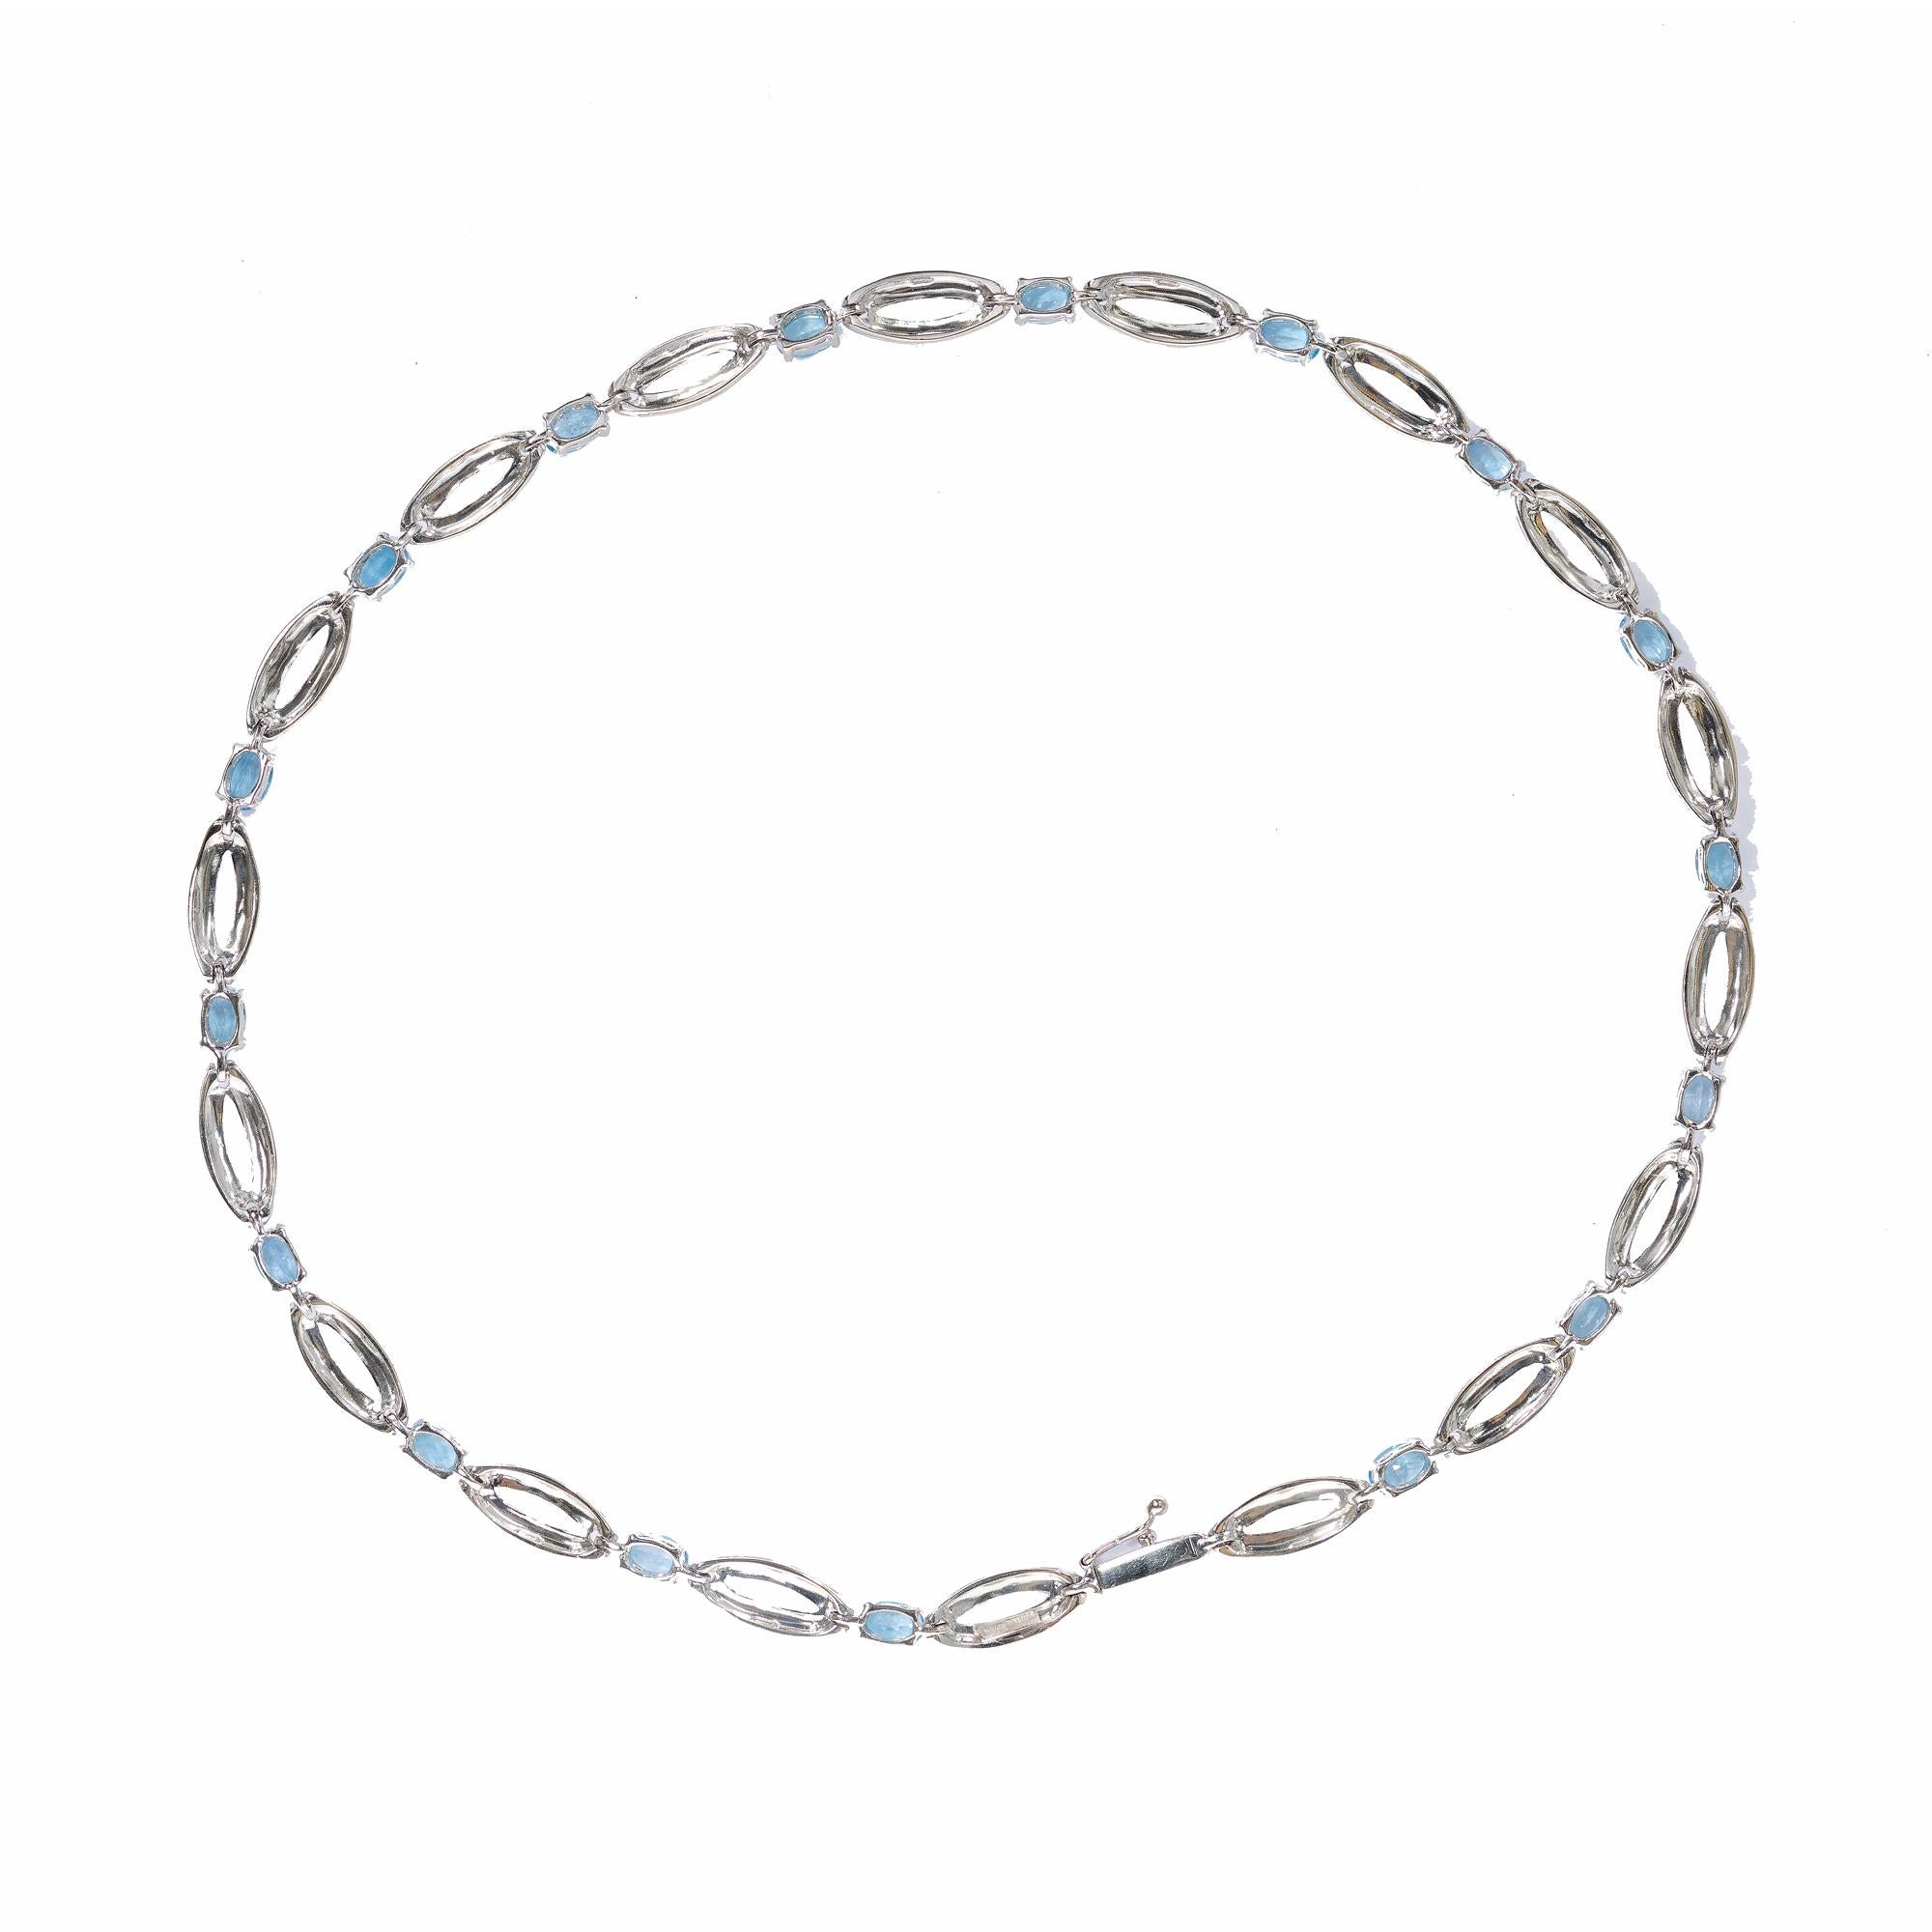 Oval blue topaz necklace. 14k White gold links with oval topaz separators. 

17 oval blue topaz, Approximate 6.50cts
Chain: 17 Inches
14k white gold 
Stamped: 14k ITALY
27.8 grams
Width: 6.2mm 
Thickness/Depth: 4.6mm
